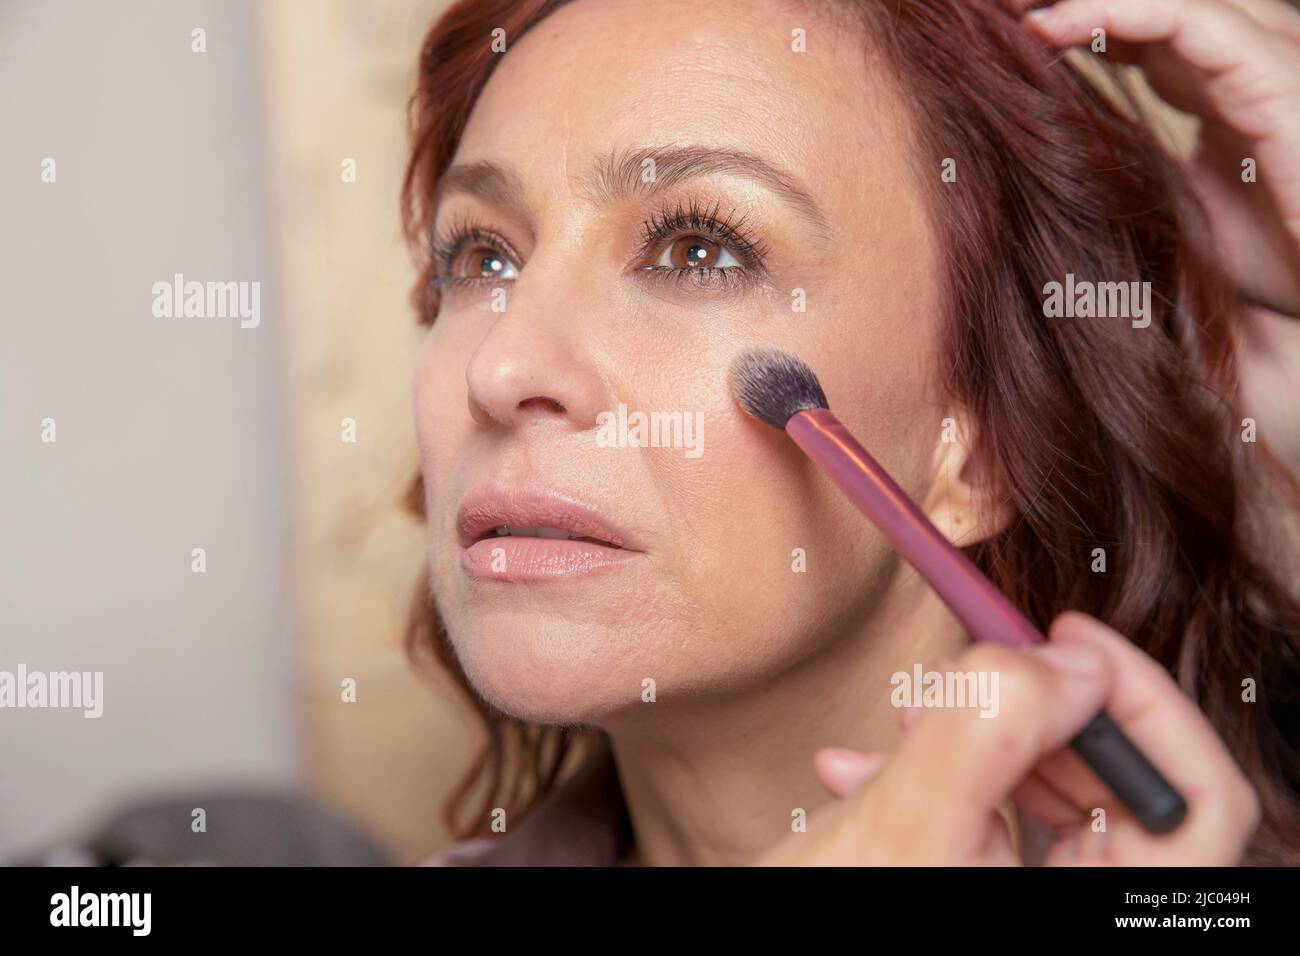 A middle-aged woman looks straight ahead while makeup is applied to her face. Stock Photo